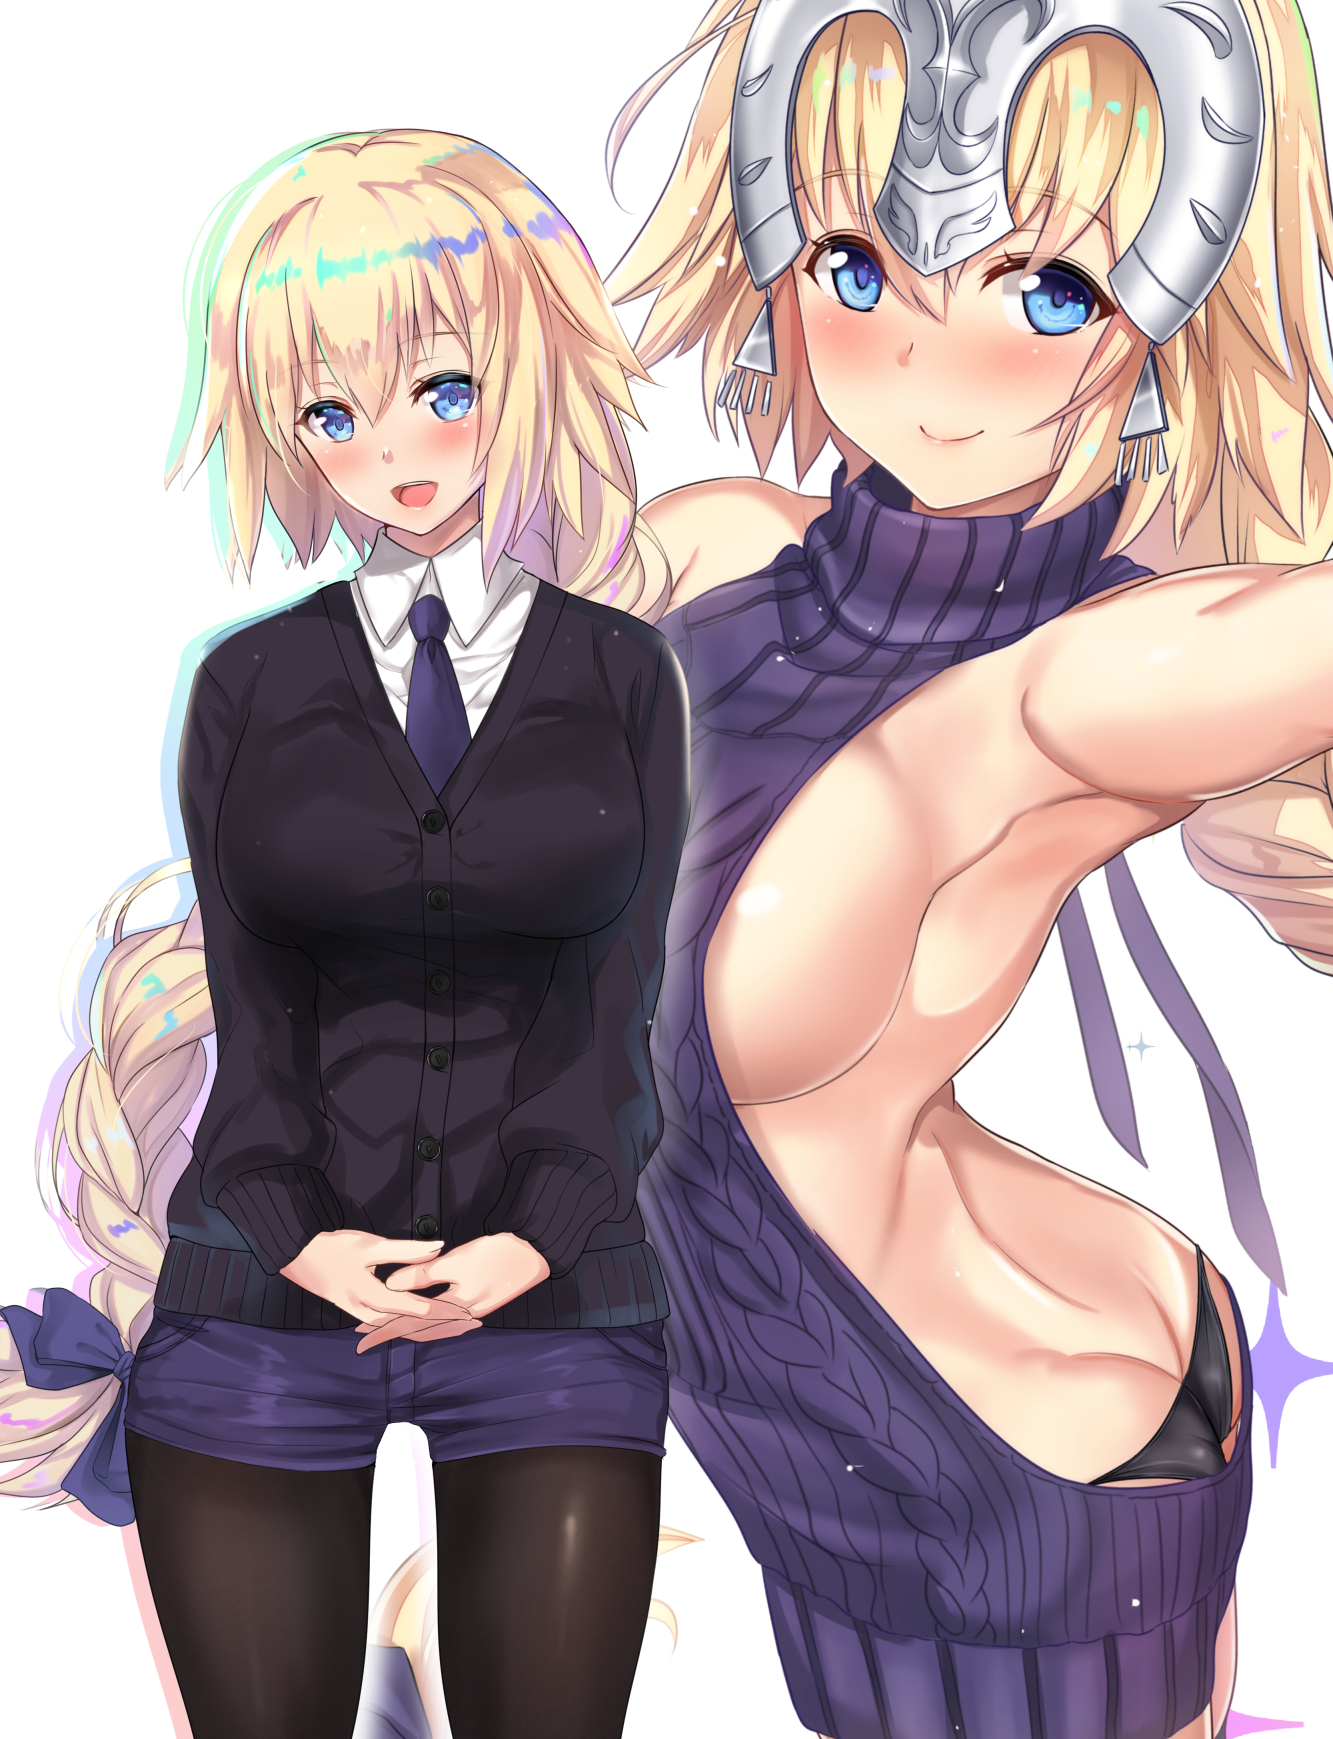 Anime 1333x1739 ass Fate/Apocrypha  no bra pantyhose Virgin Killer Sweater Fate series anime girls Fate/Grand Order ecchi blushing cardigan blue eyes blonde big boobs sideboob cleavage thong black panties thighs looking at viewer armpits french braids 2D bangs short shorts Ruler (Fate/Apocrypha) Jeanne d'Arc (Fate) long hair open mouth smiling portrait display simple background fan art backless dress curvy Untue